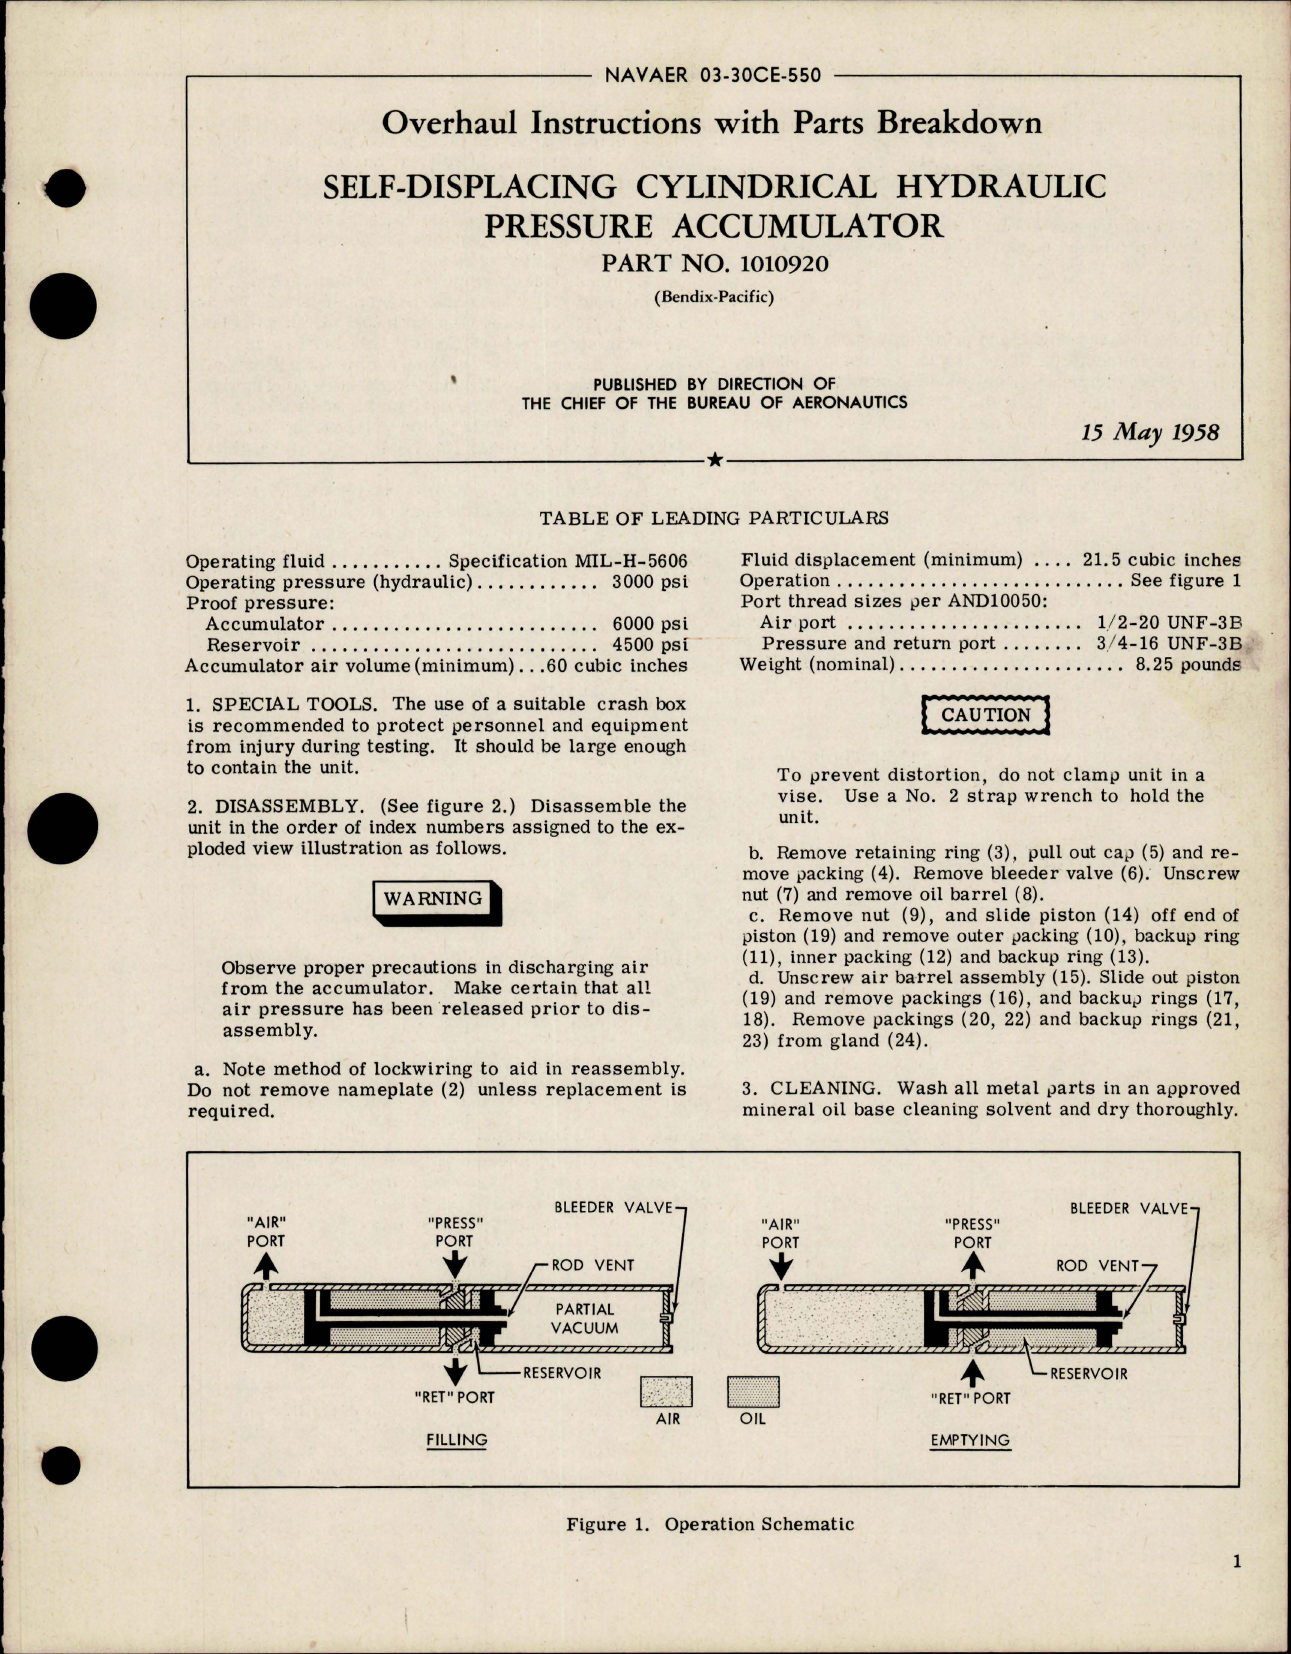 Sample page 1 from AirCorps Library document: Overhaul Instructions with Parts for Self-Displacing Cylindrical Hydraulic Pressure Accumulator - Part 1010920 